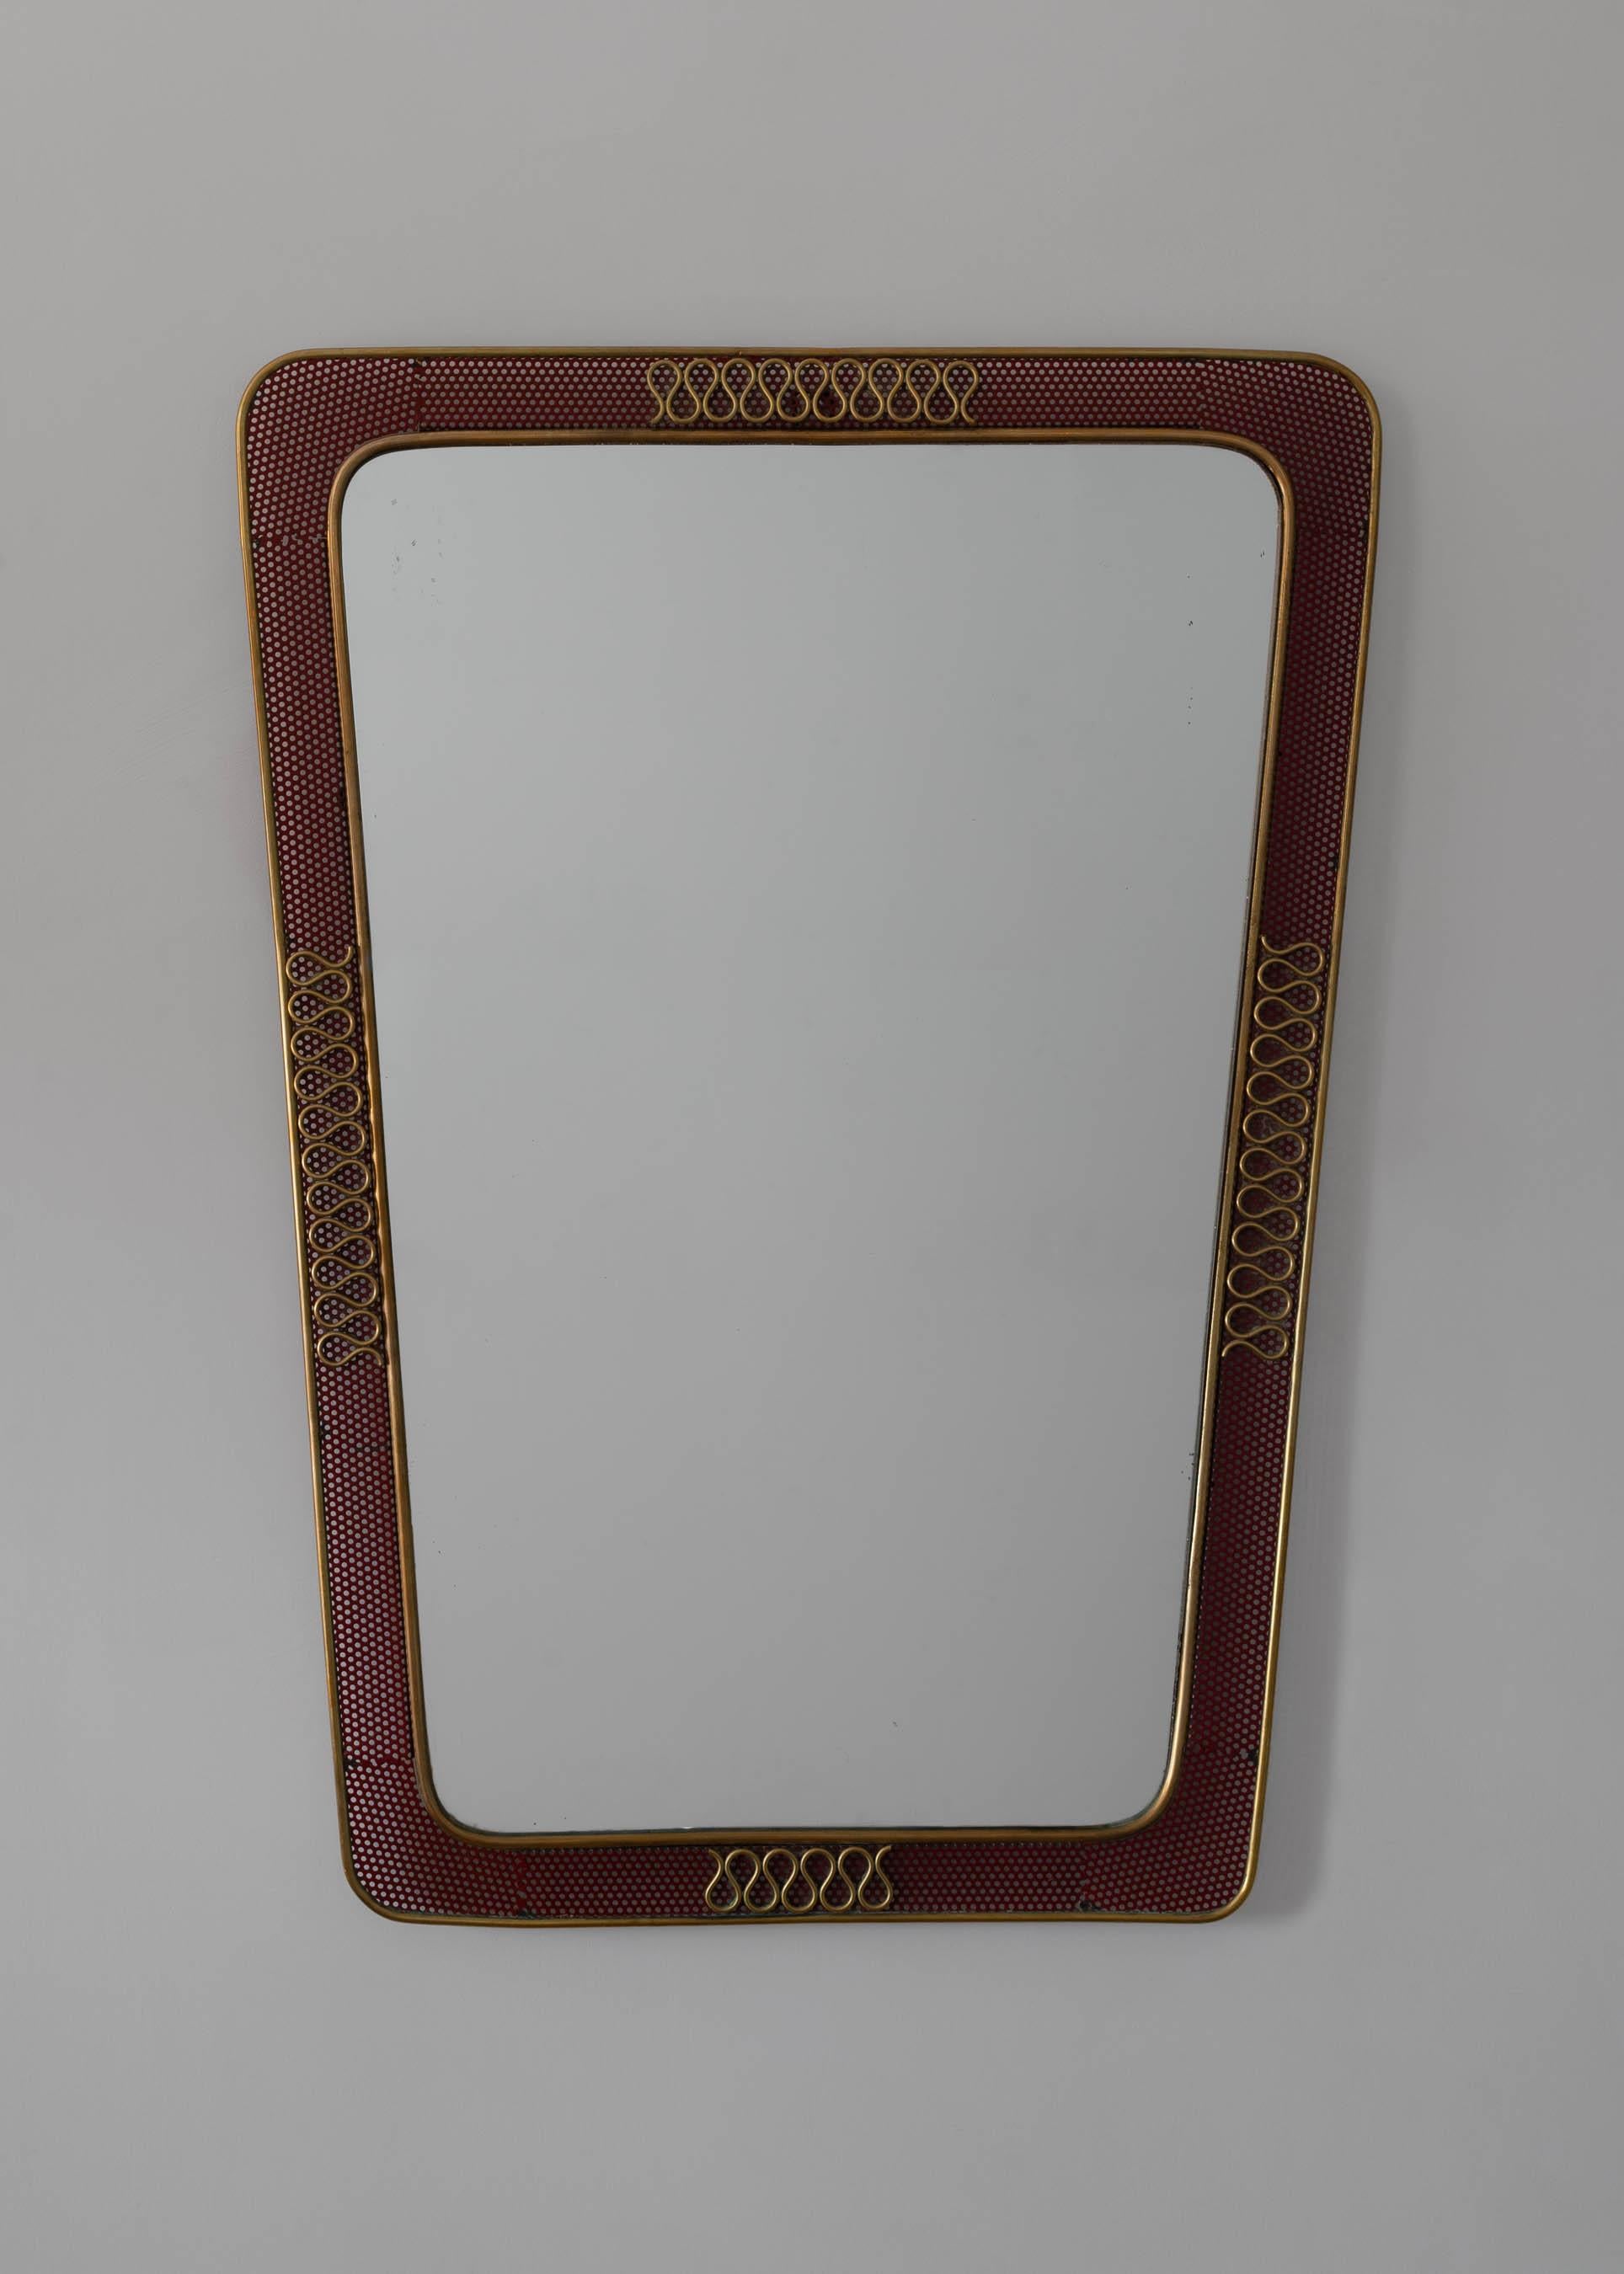 Brass and perforated metal mirror by Carlo Erba. Made in Italy circa 1950s.